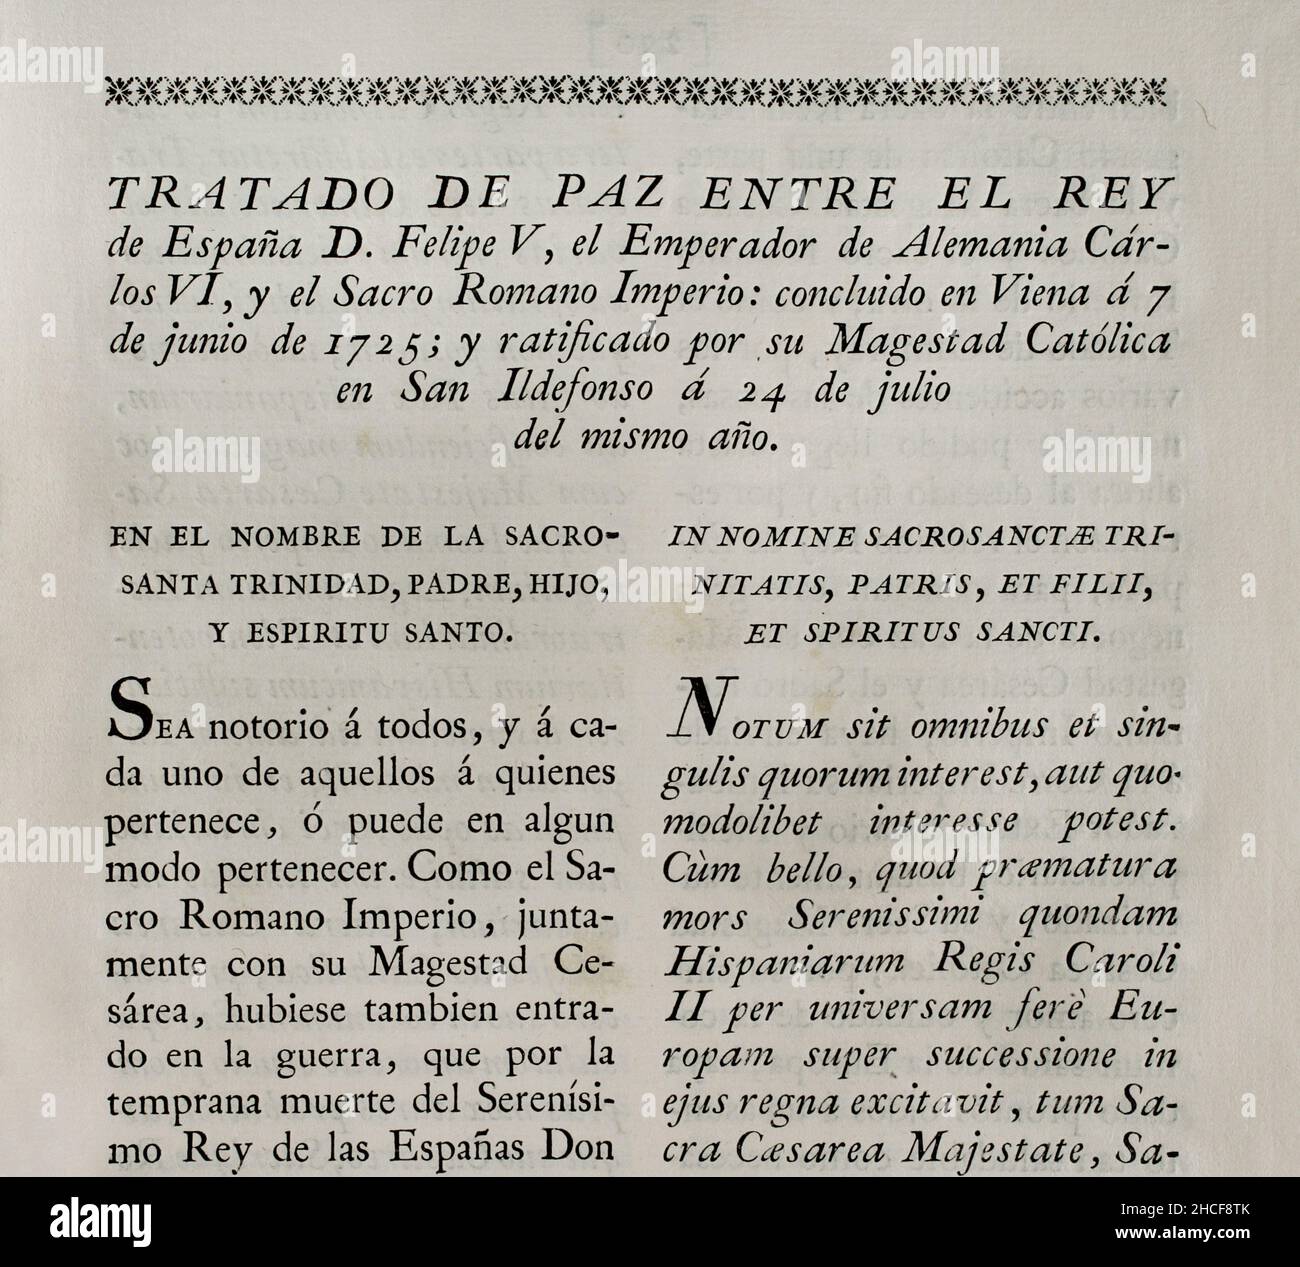 Peace treaty between the King of Spain Philip V and the Holy Roman Emperor Charles VI. Concluded in Vienna on 7 June 1725; ratified by Philip V in San Ildefonso on 24 July of that year. Collection of the Treaties of Peace, Alliance, Commerce adjusted by the Crown of Spain with the Foreign Powers (Colección de los Tratados de Paz, Alianza, Comercio ajustados por la Corona de España con las Potencias Extranjeras). Volume II. Madrid, 1800. Historical Military Library of Barcelona, Catalonia, Spain. Stock Photo